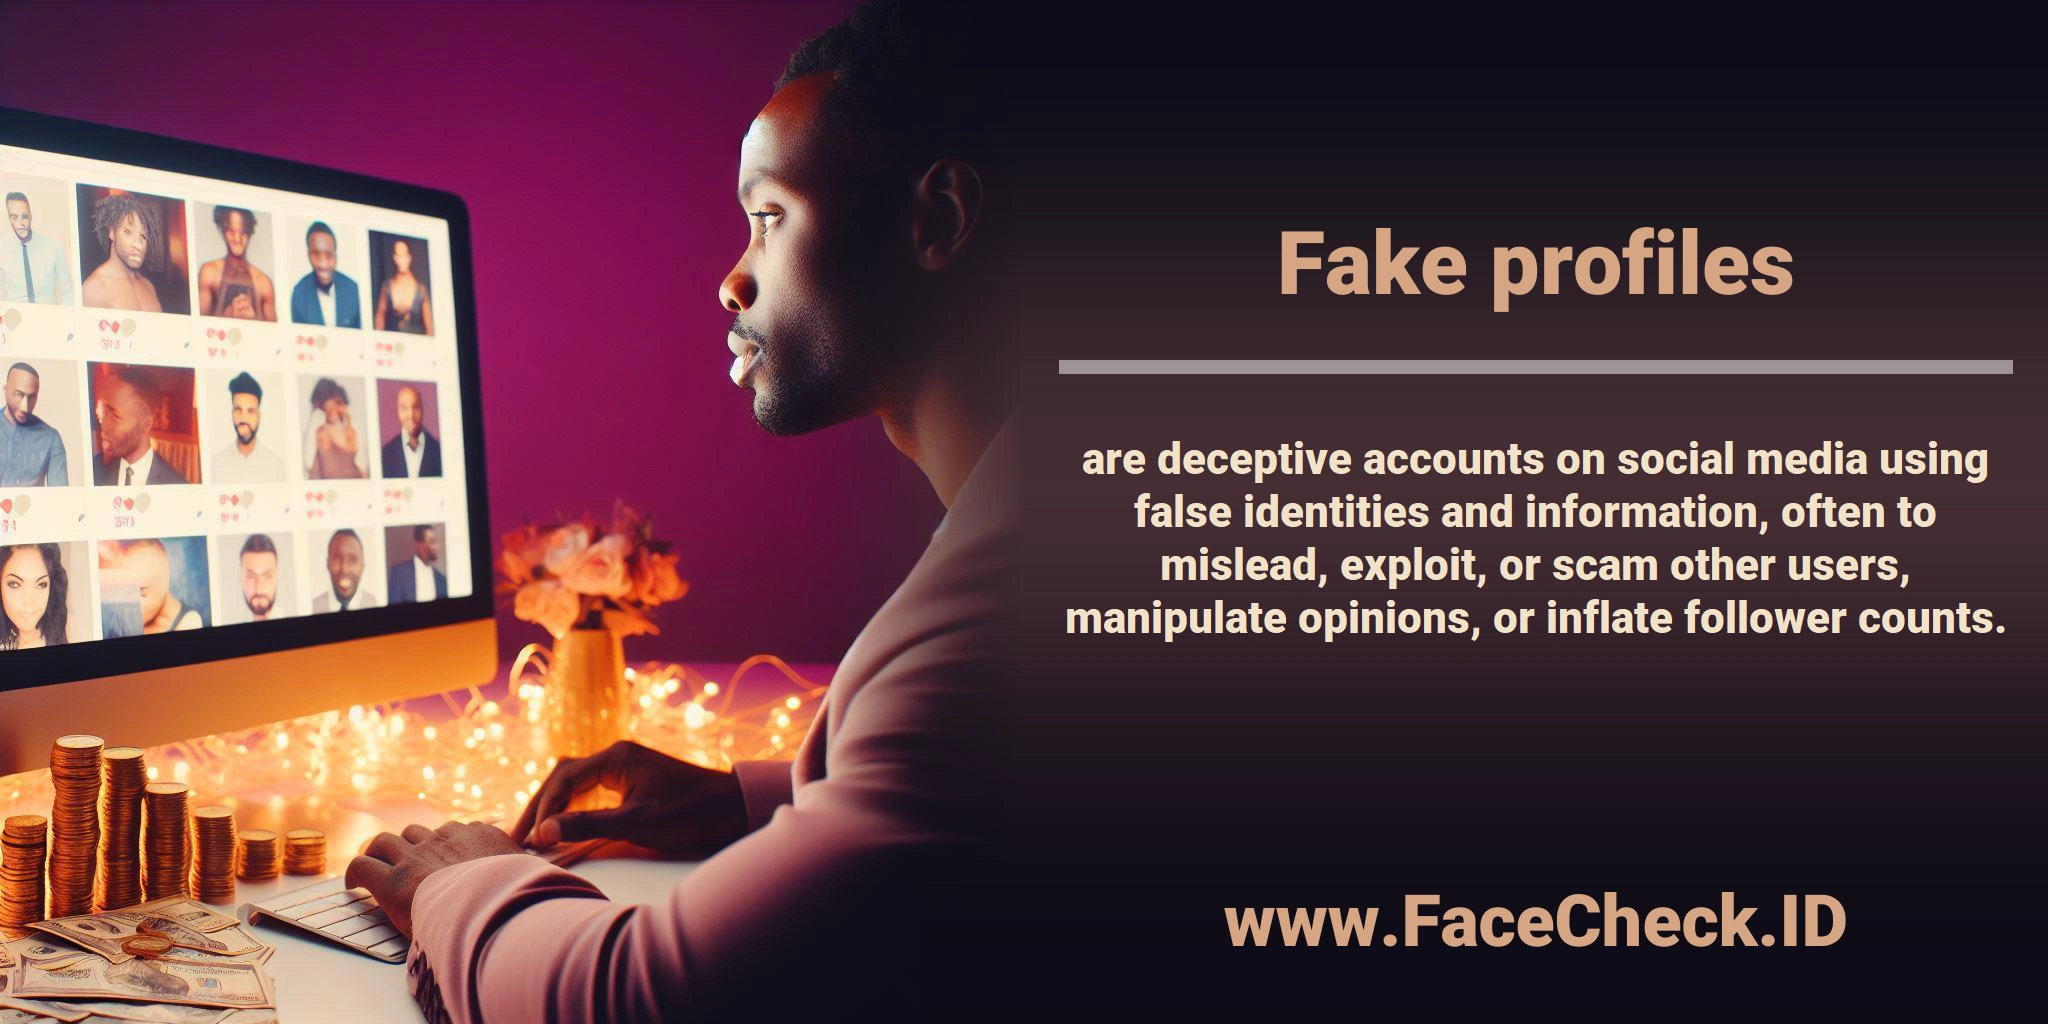 <b>Fake profiles</b> are deceptive accounts on social media using false identities and information, often to mislead, exploit, or scam other users, manipulate opinions, or inflate follower counts.